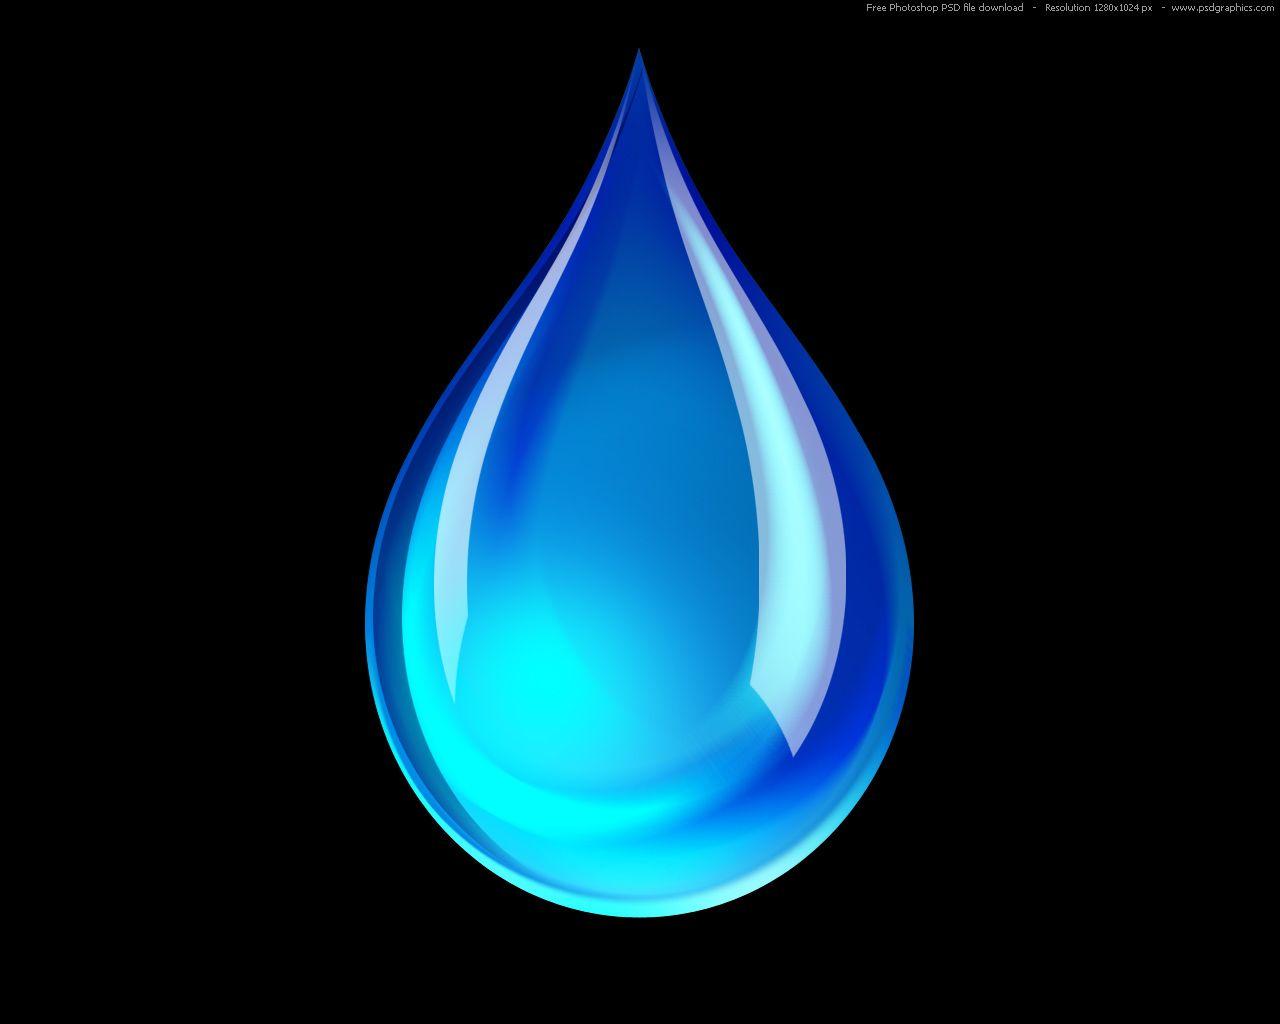 Blue Water Drop Logo - PSD blue water droplet icon | PSDGraphics